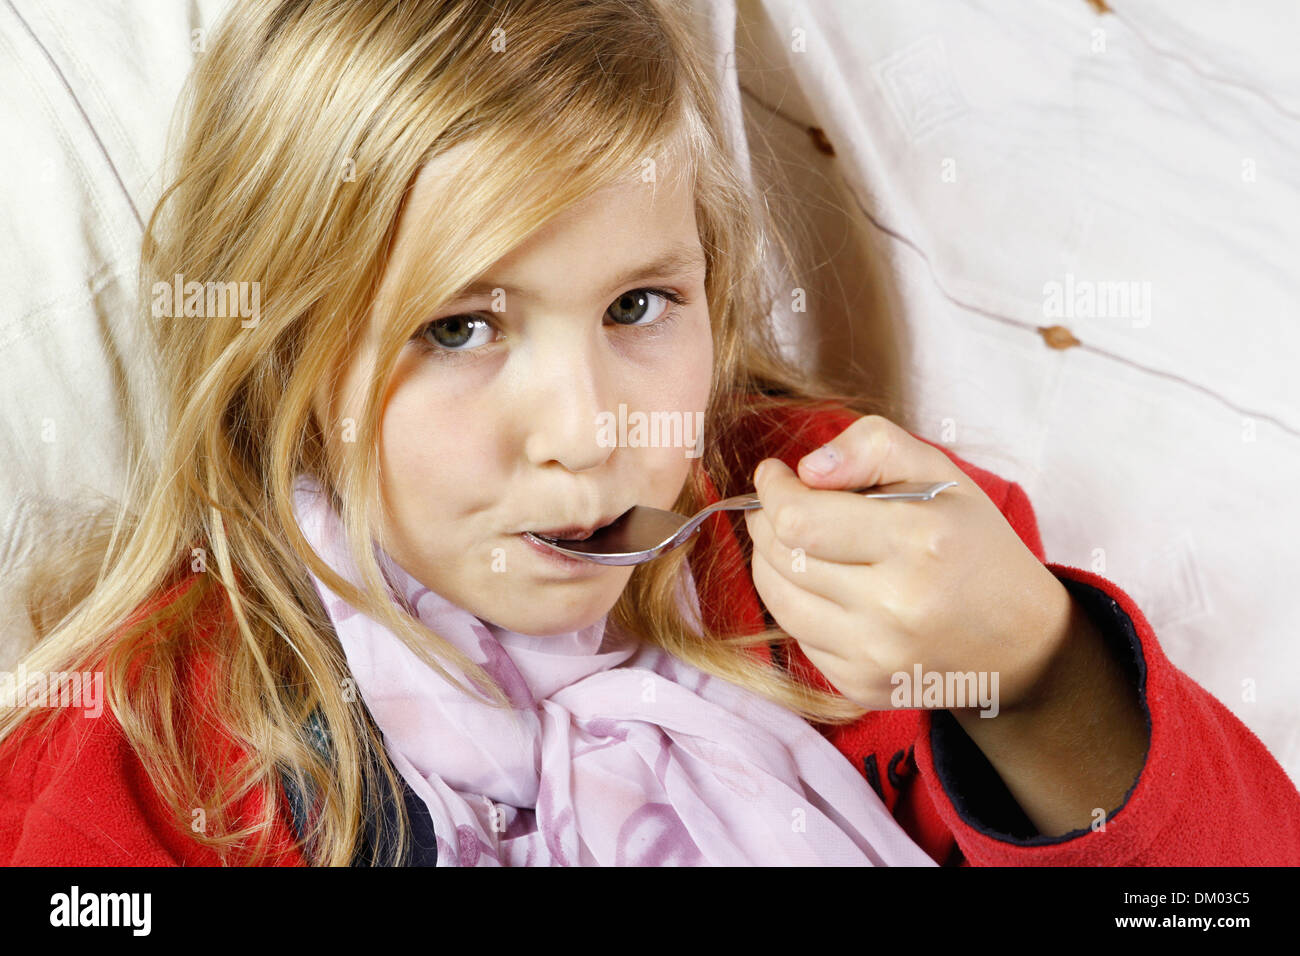 COUGHING TREATMENT CHILD Stock Photo